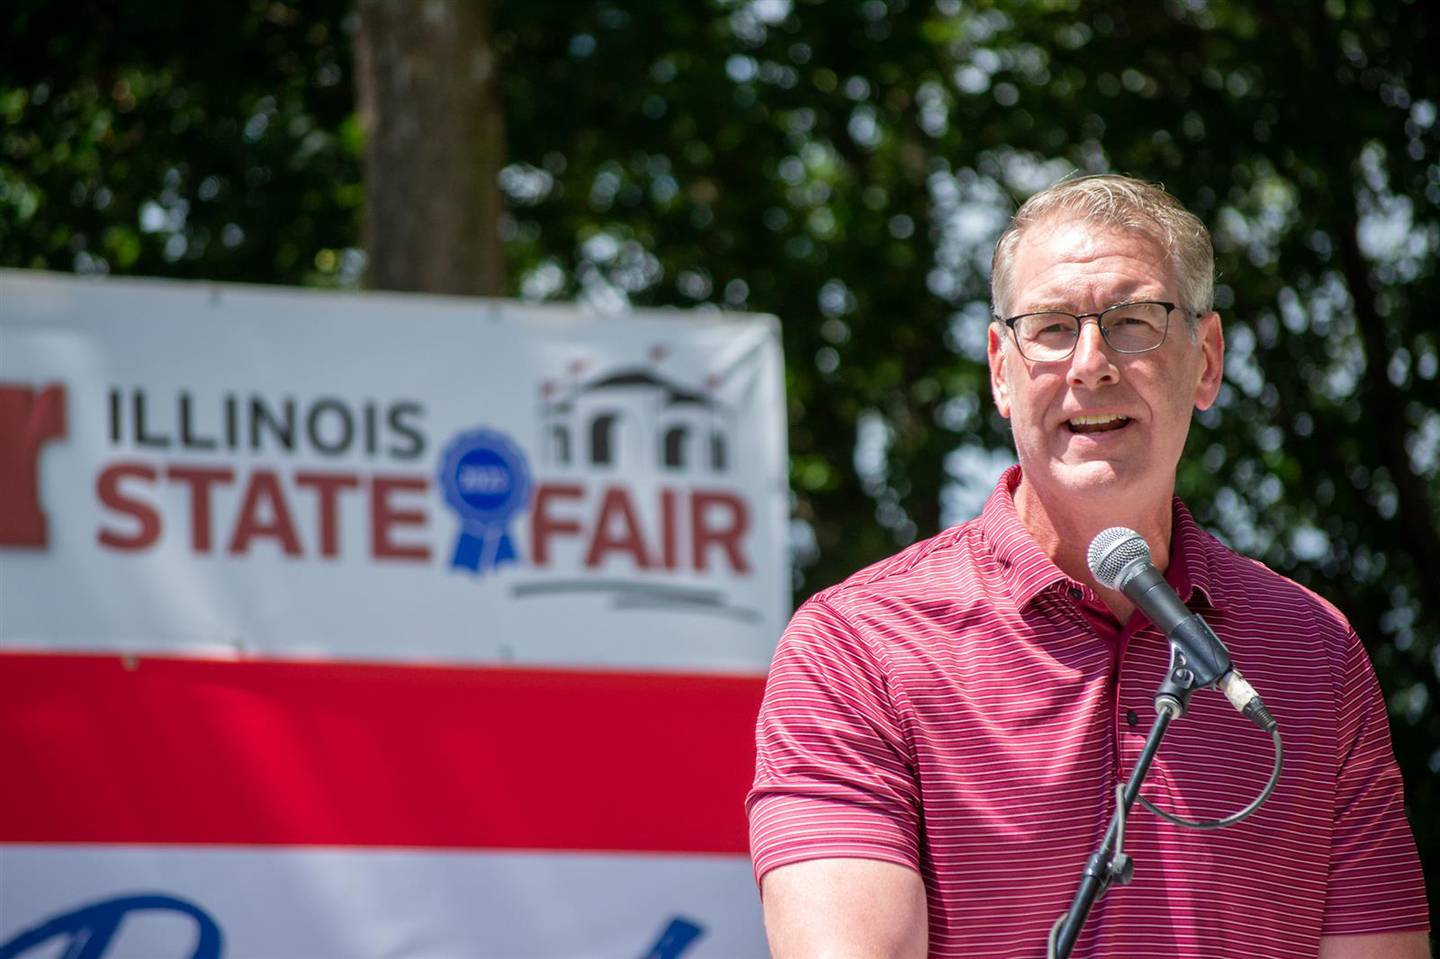 State Senate Republican Leader John Curran, of Downers Grove, speaks to the crowd during Illinois State Fair Republican Day festivities in Springfield.